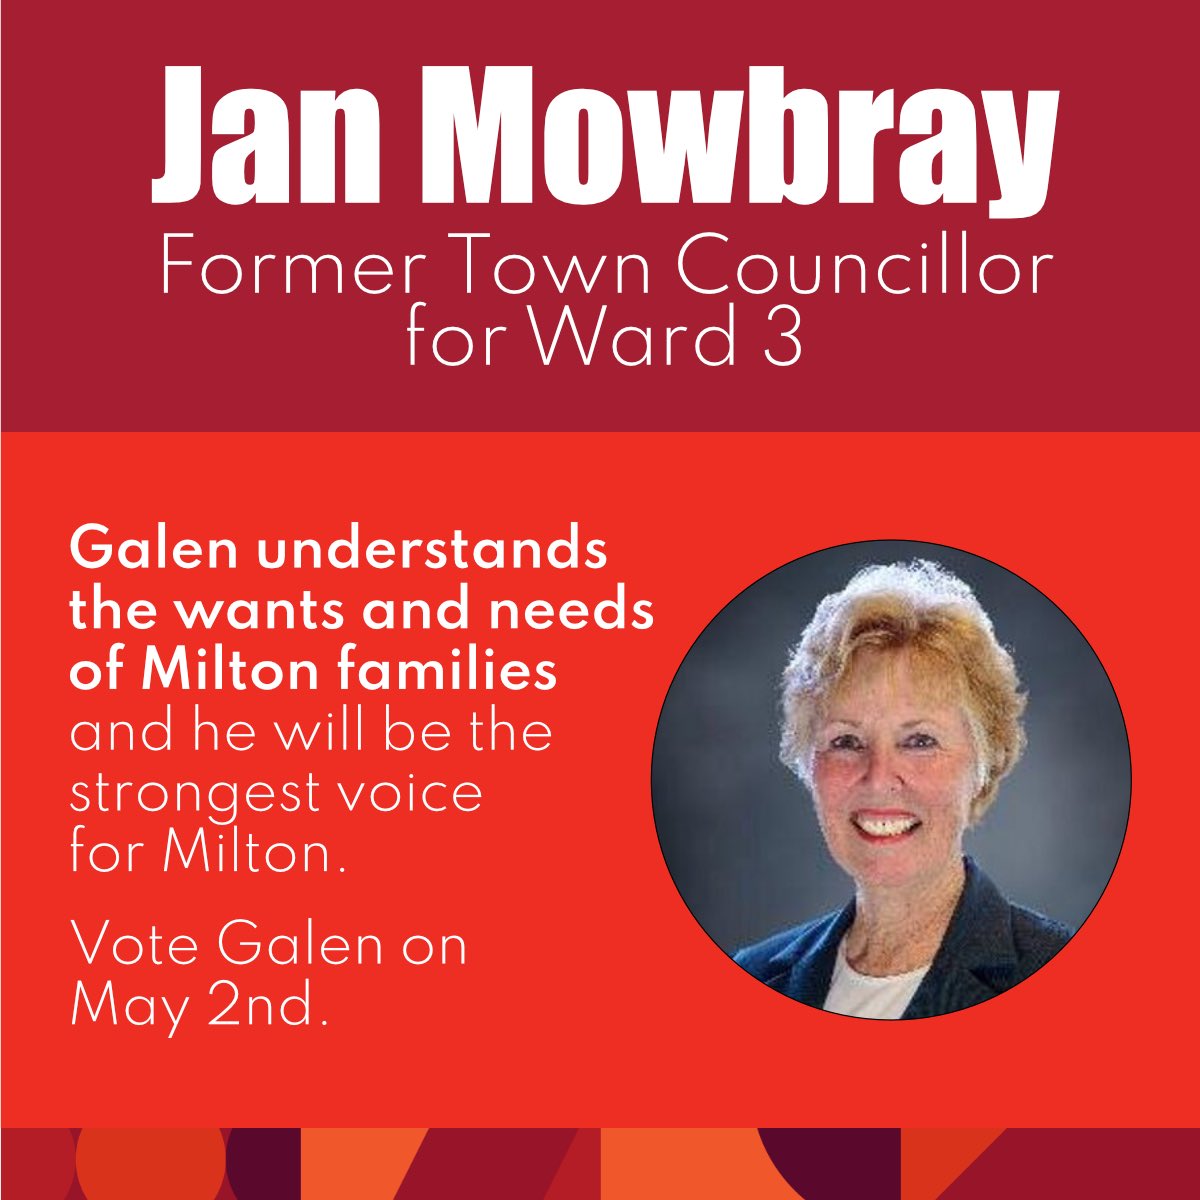 Thank you for your support, Jan! “Galen understands the wants and needs of Milton families and he will be the strongest voice for Milton. Vote Galen on May 2nd.”